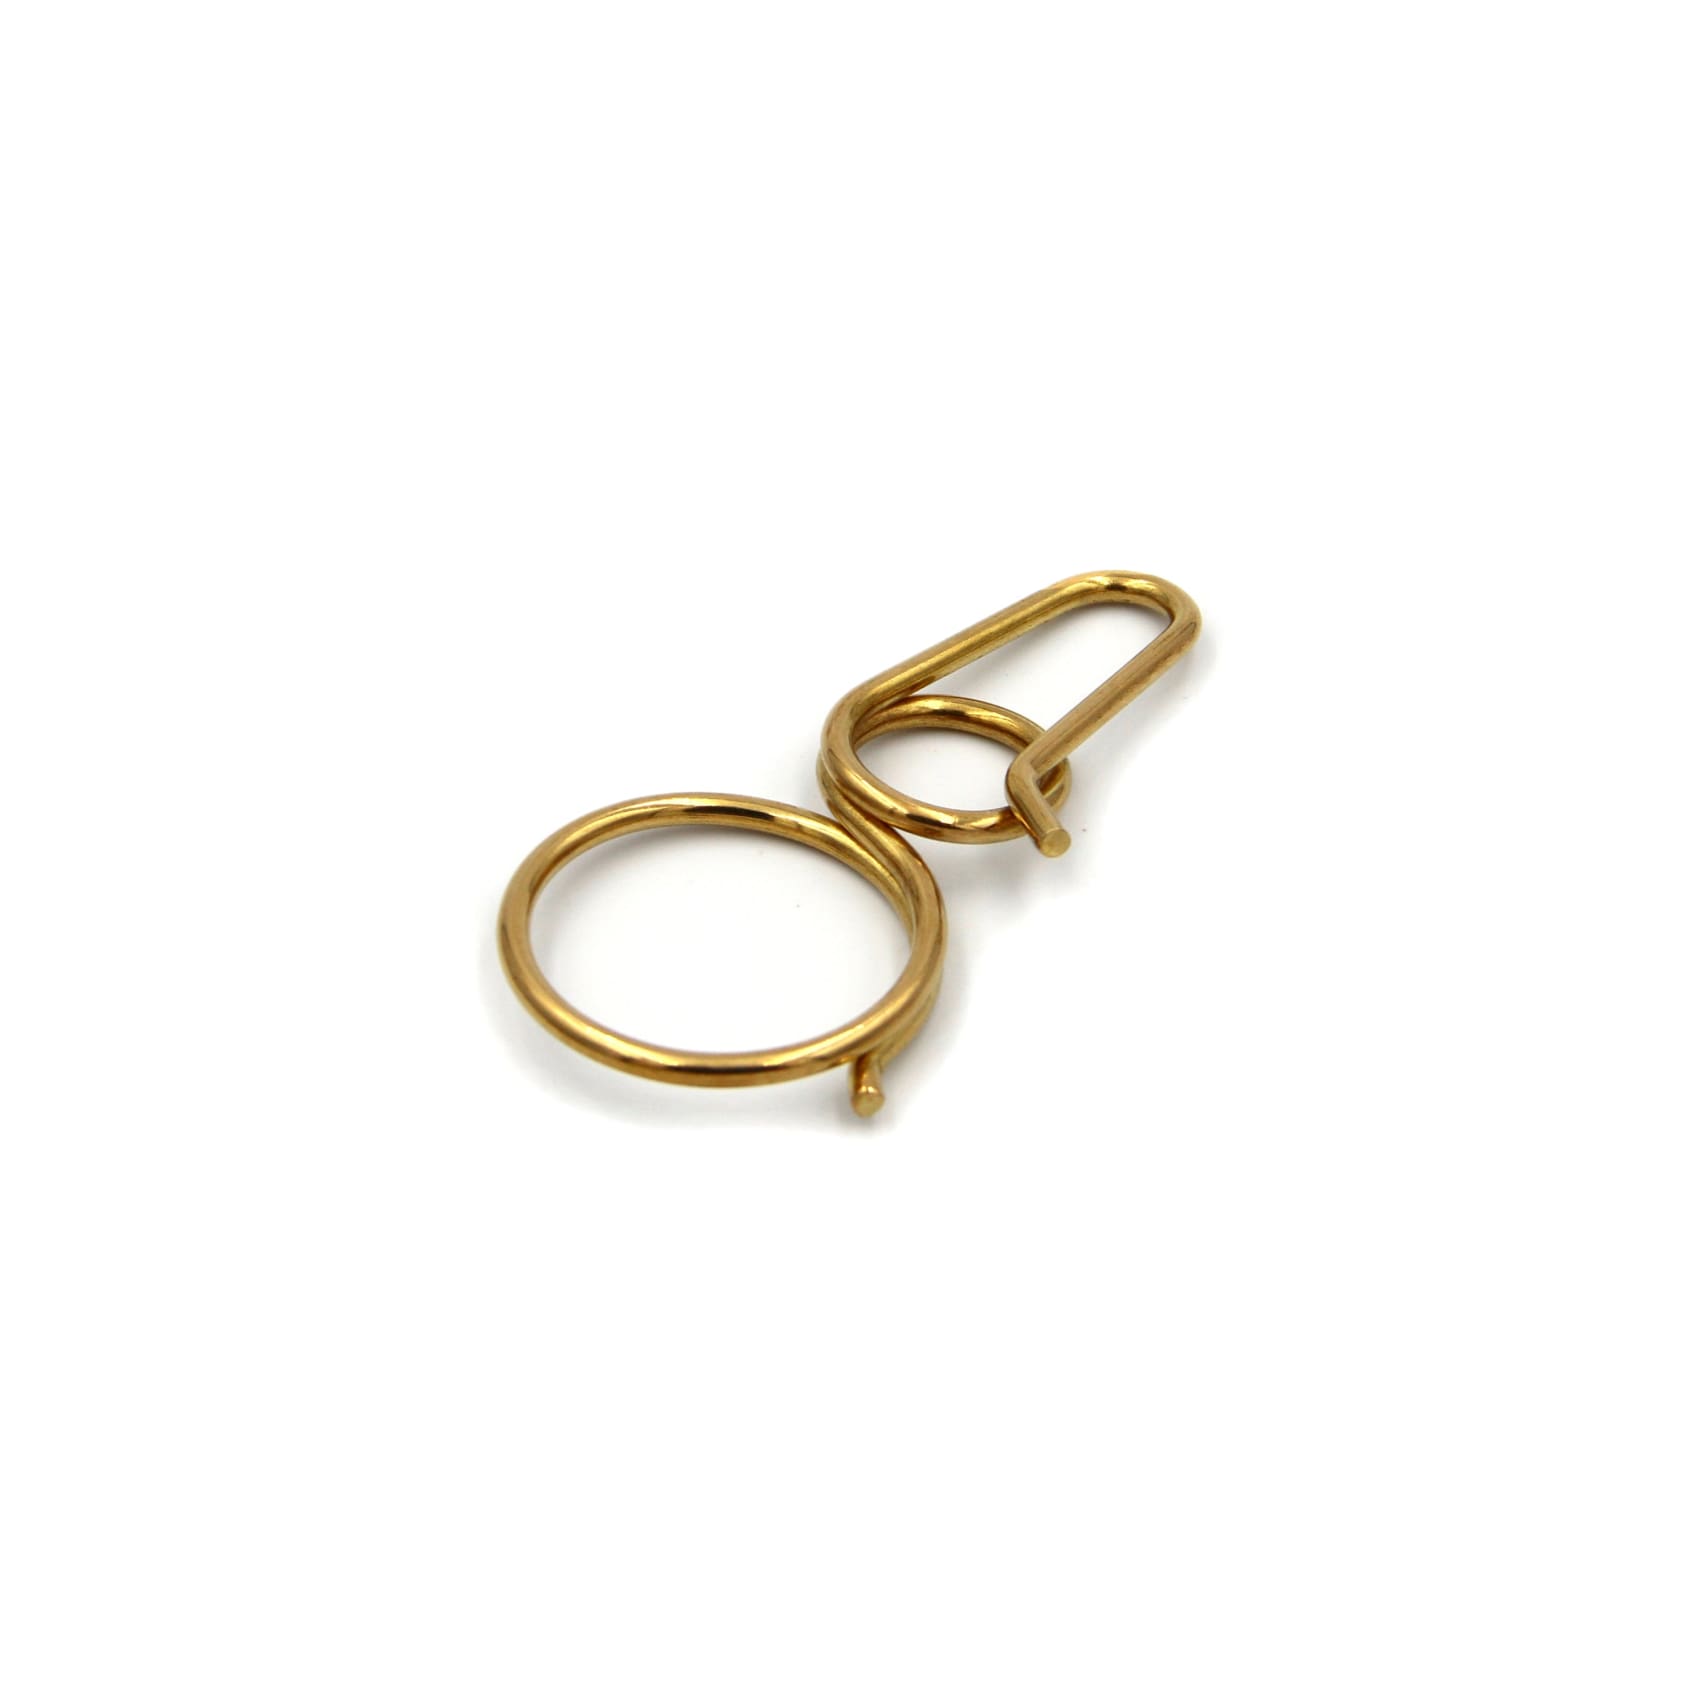 Brass Key Manager Wire Wrapped - 1pcs - Keychains